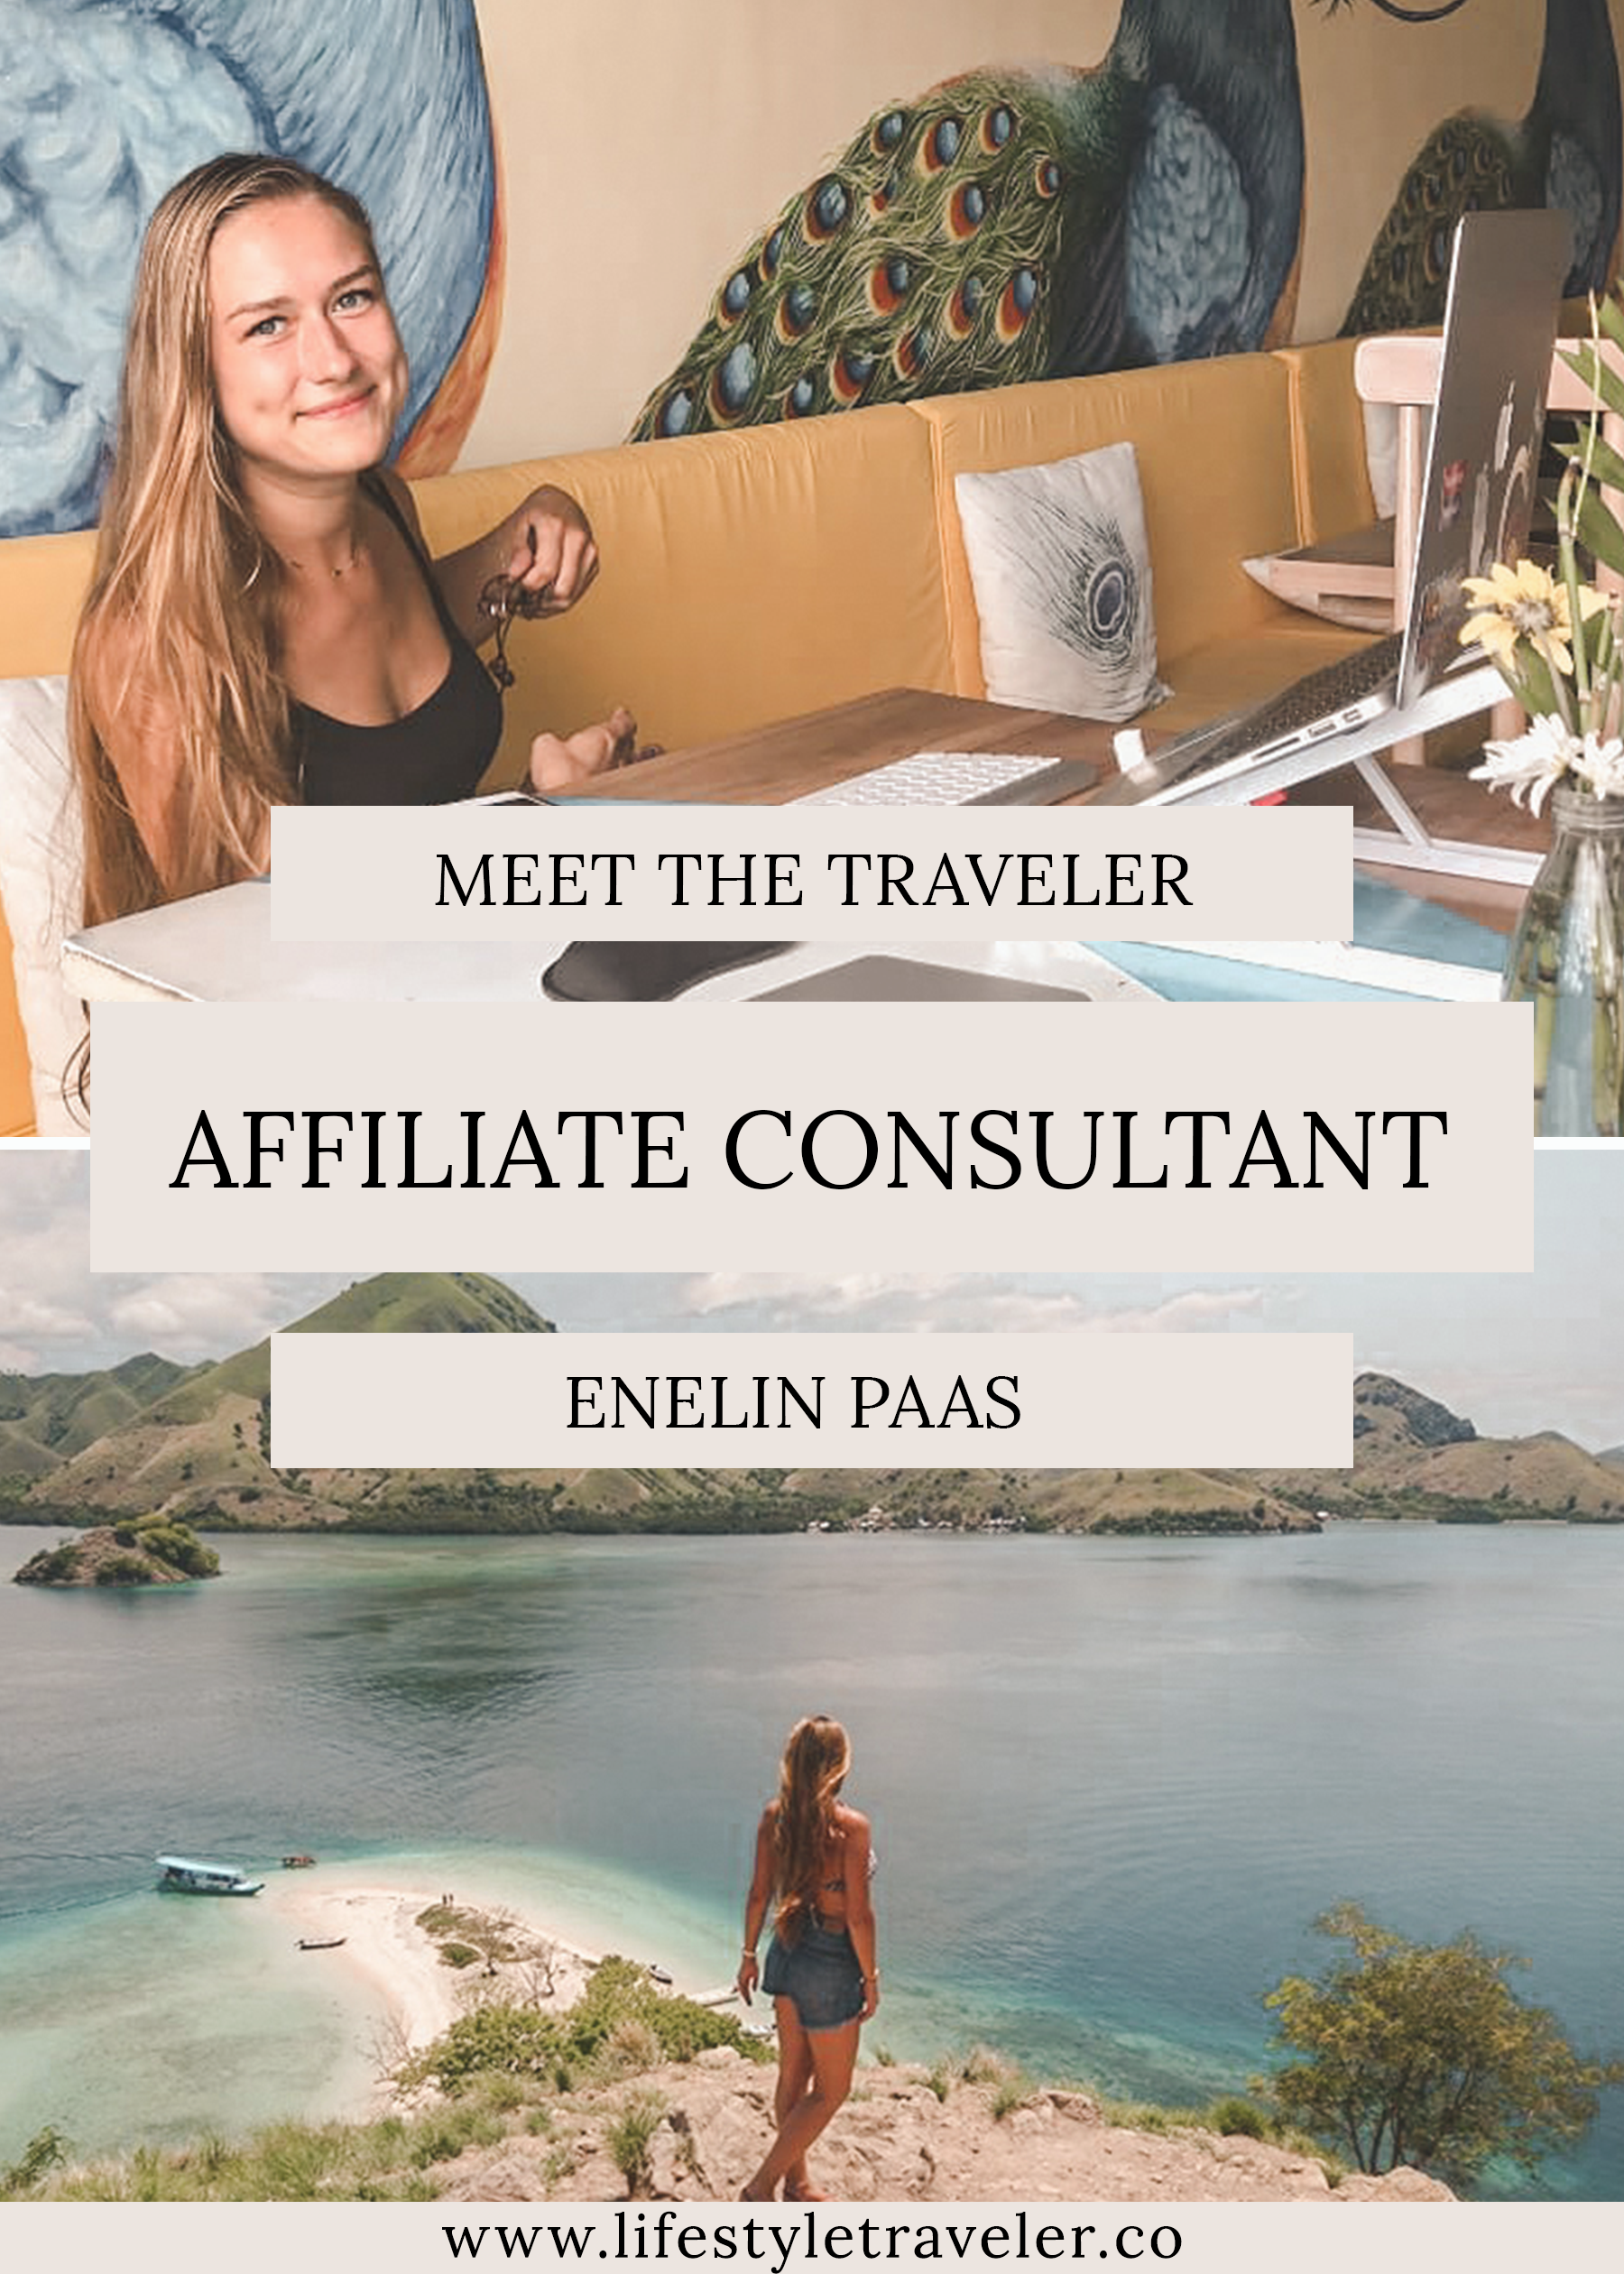 Meet The Traveler: Affiliate Consultant Enelin Paas | lifestyletraveler.co | IG: @lifestyletraveler.co | Photo by: Enelin Paas